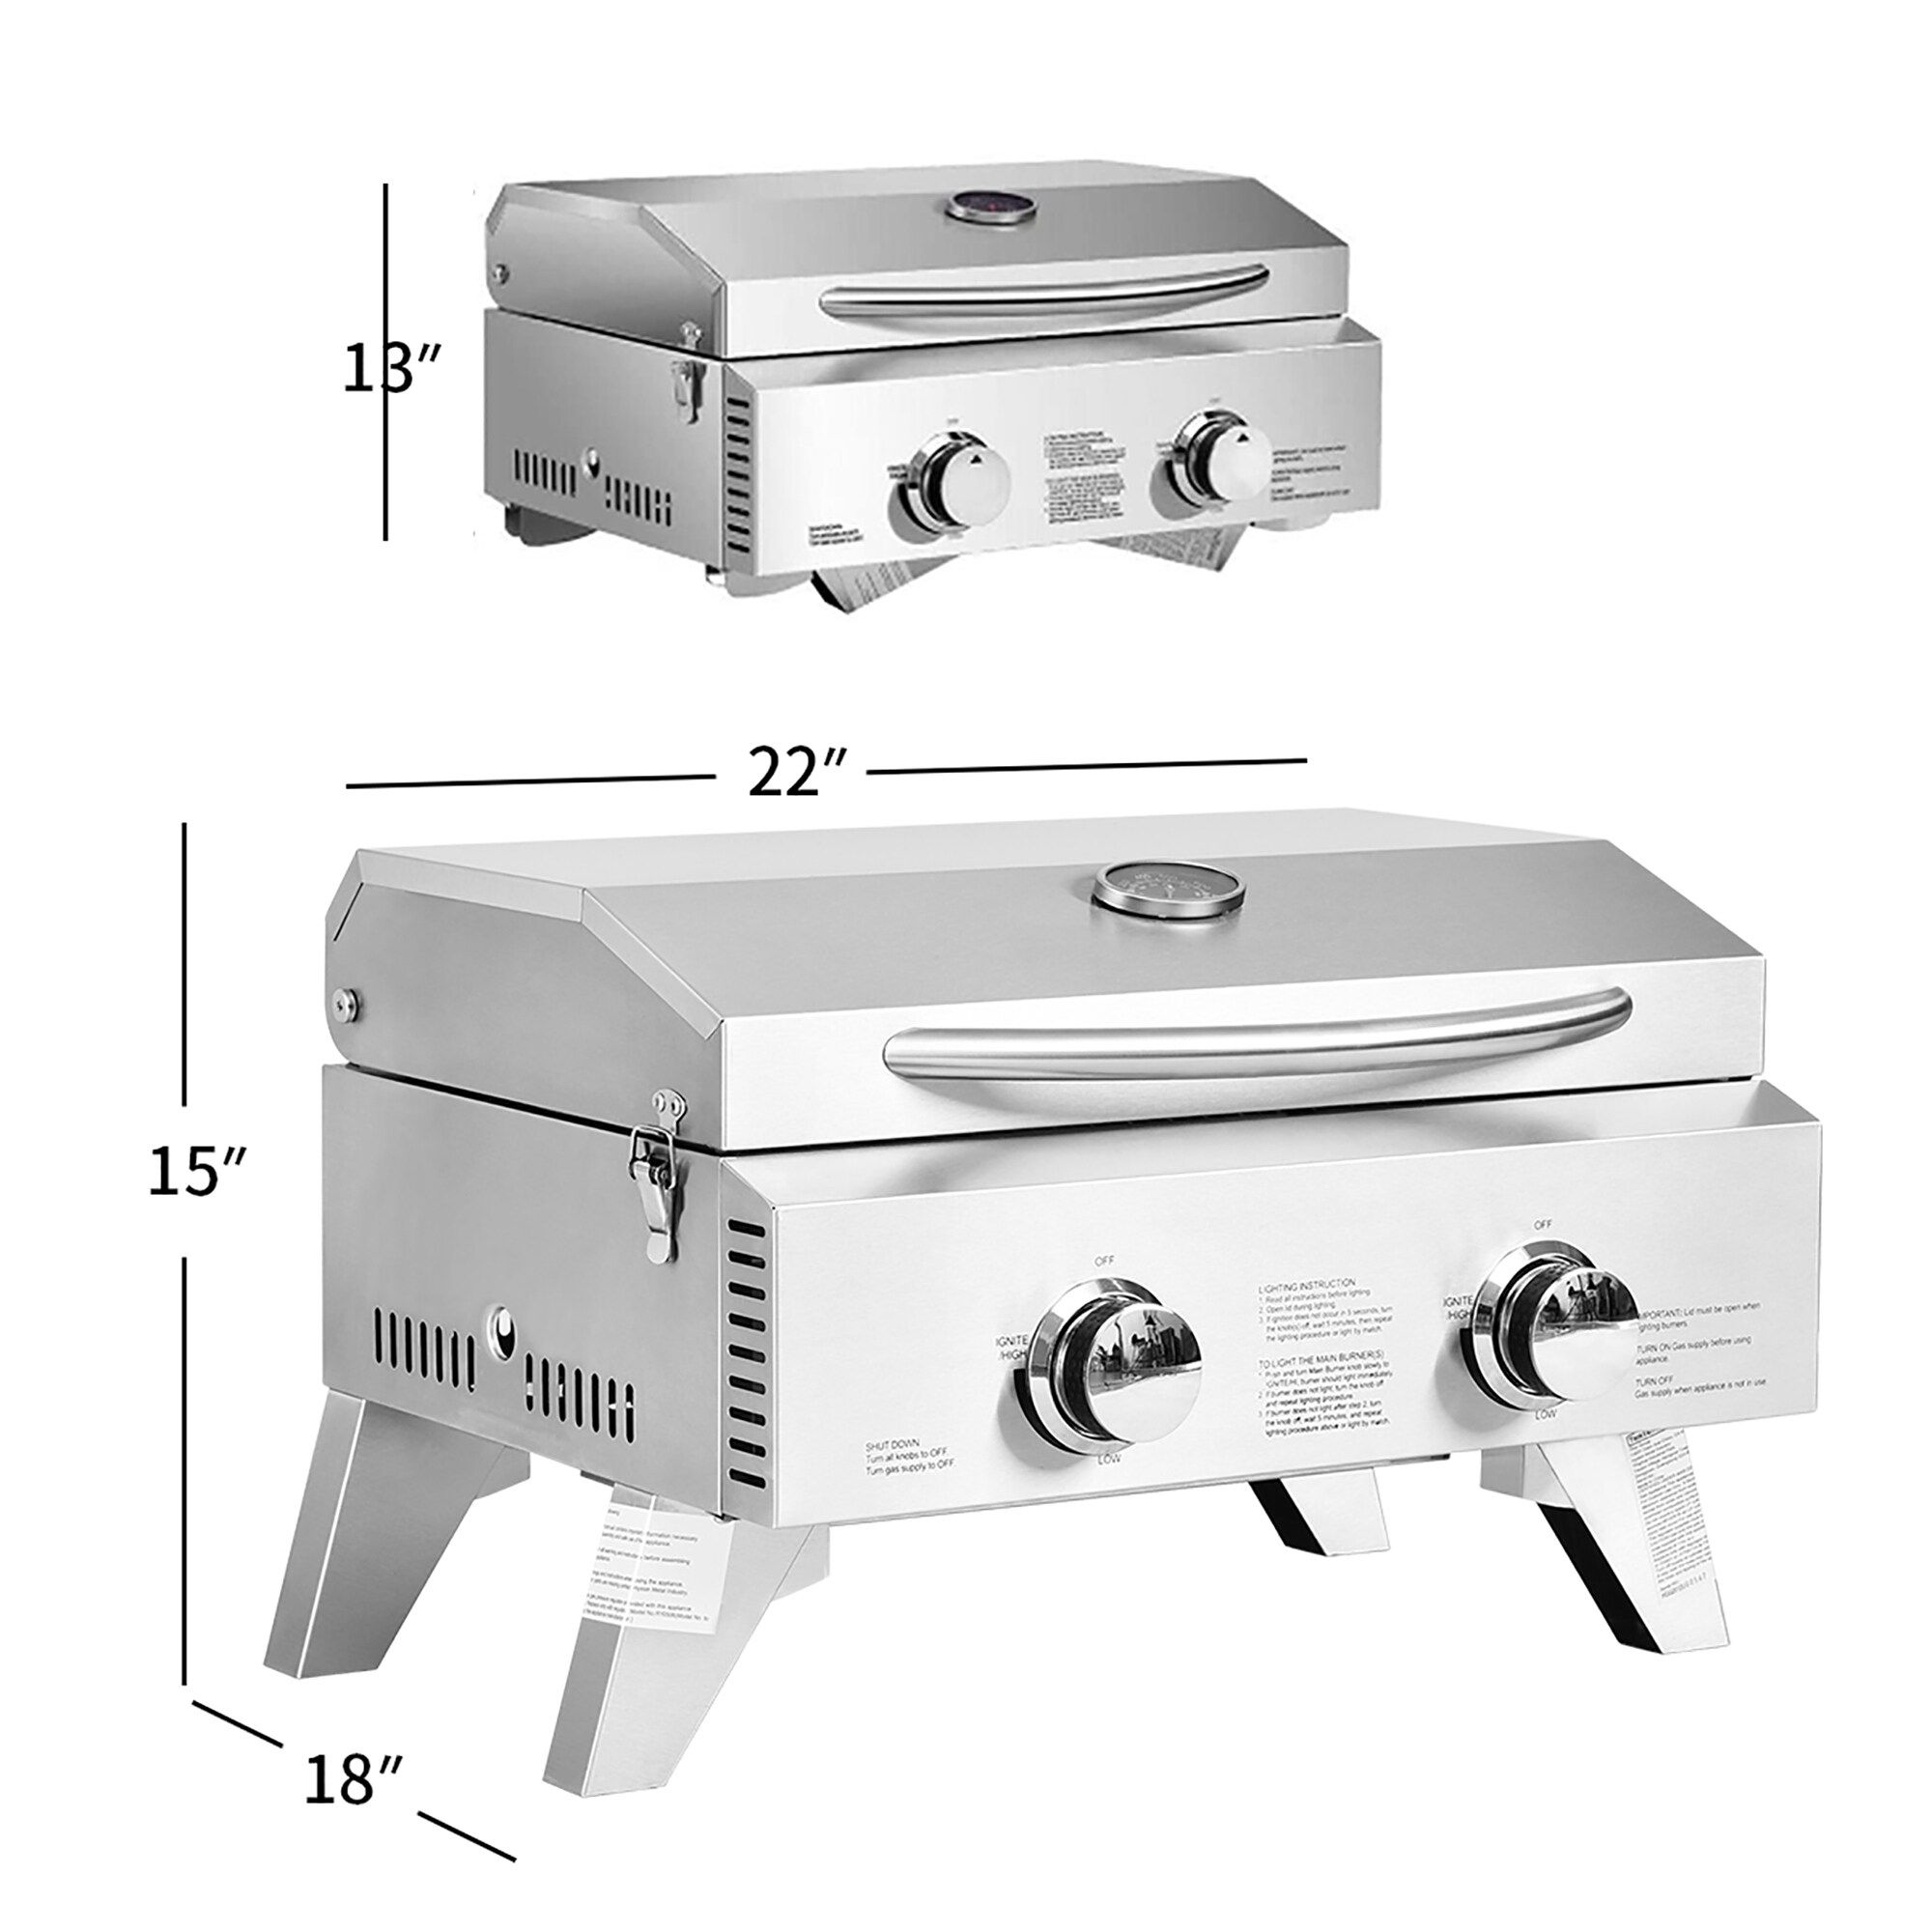 Costway 20,000 BTU Stainless Steel Propane Grill for Outdoor Camping, - 22'' x 18'' x 15'' (L x W x H)